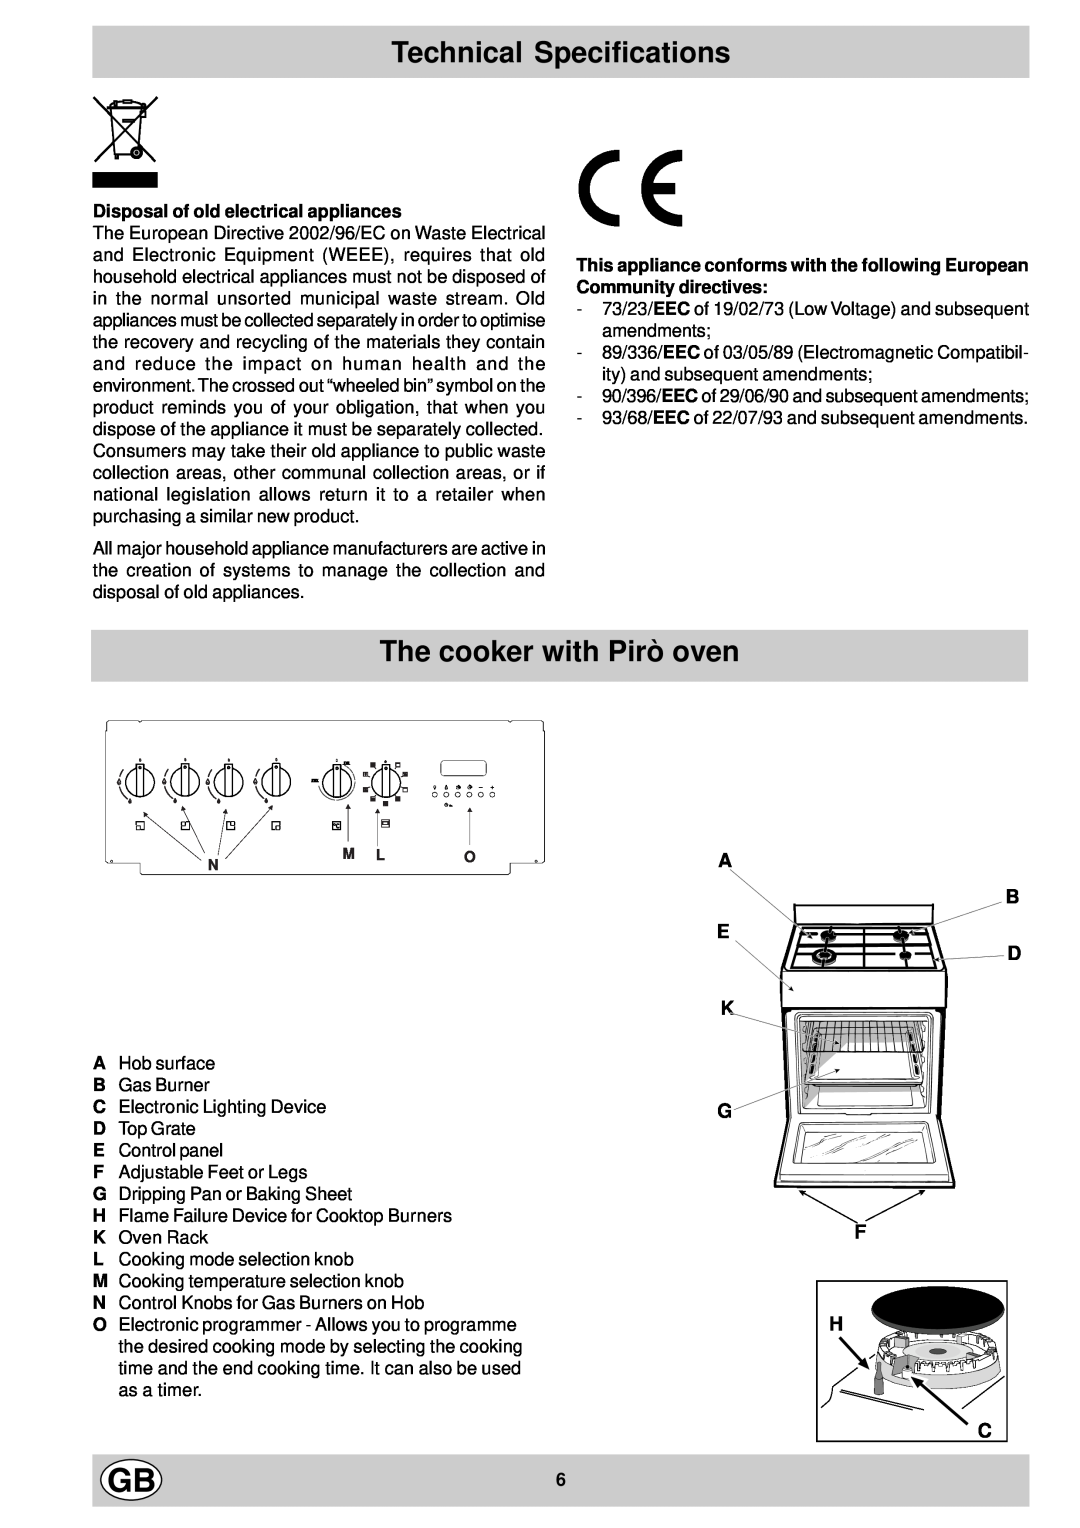 Hotpoint EG600P manual The cooker with Pirò oven, Technical Specifications, A B E D, Disposal of old electrical appliances 